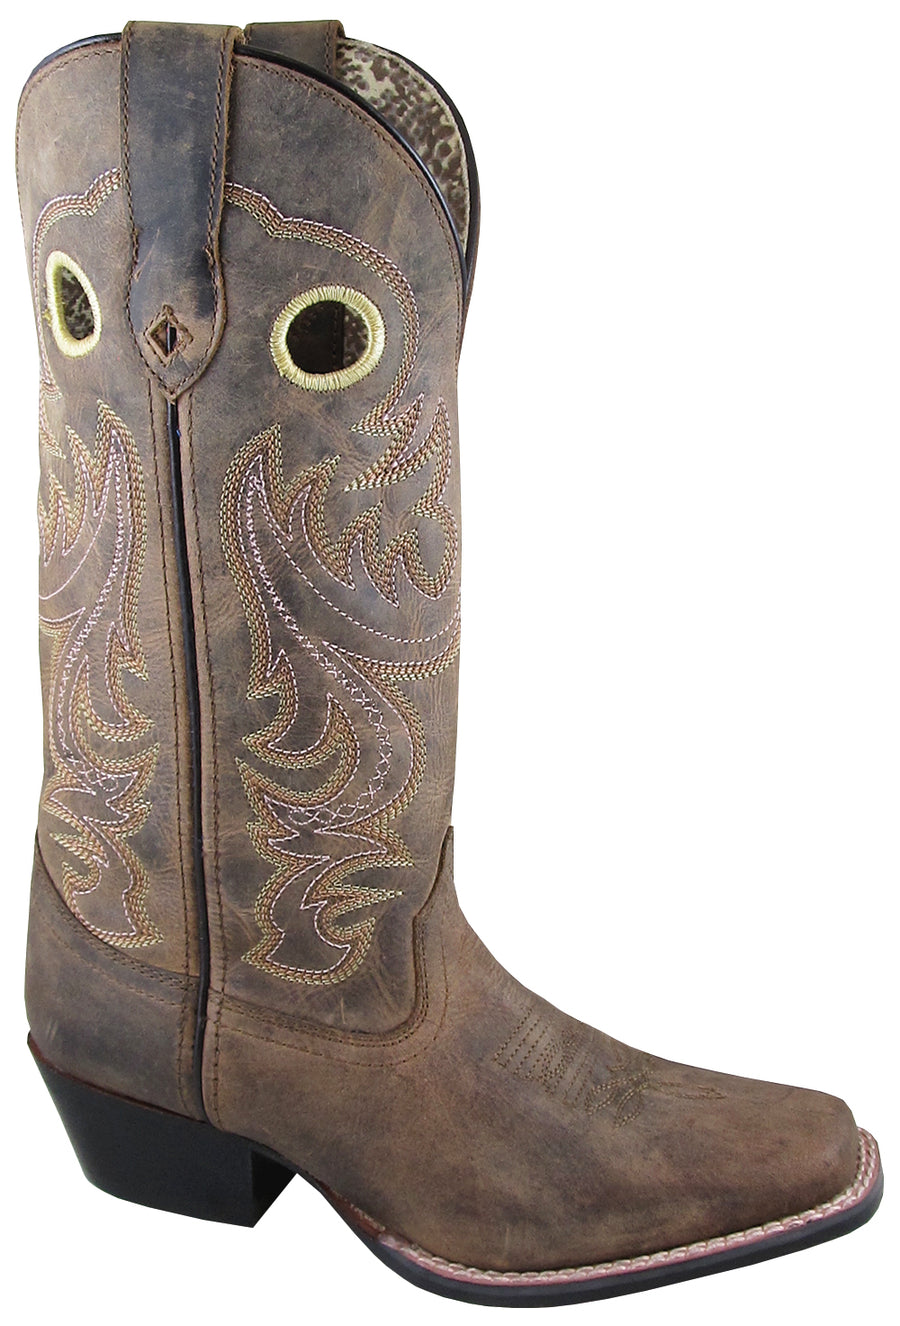 Smoky Women Wilma 12 Inch Distress Leather Cowboy Boot,Brown Distress